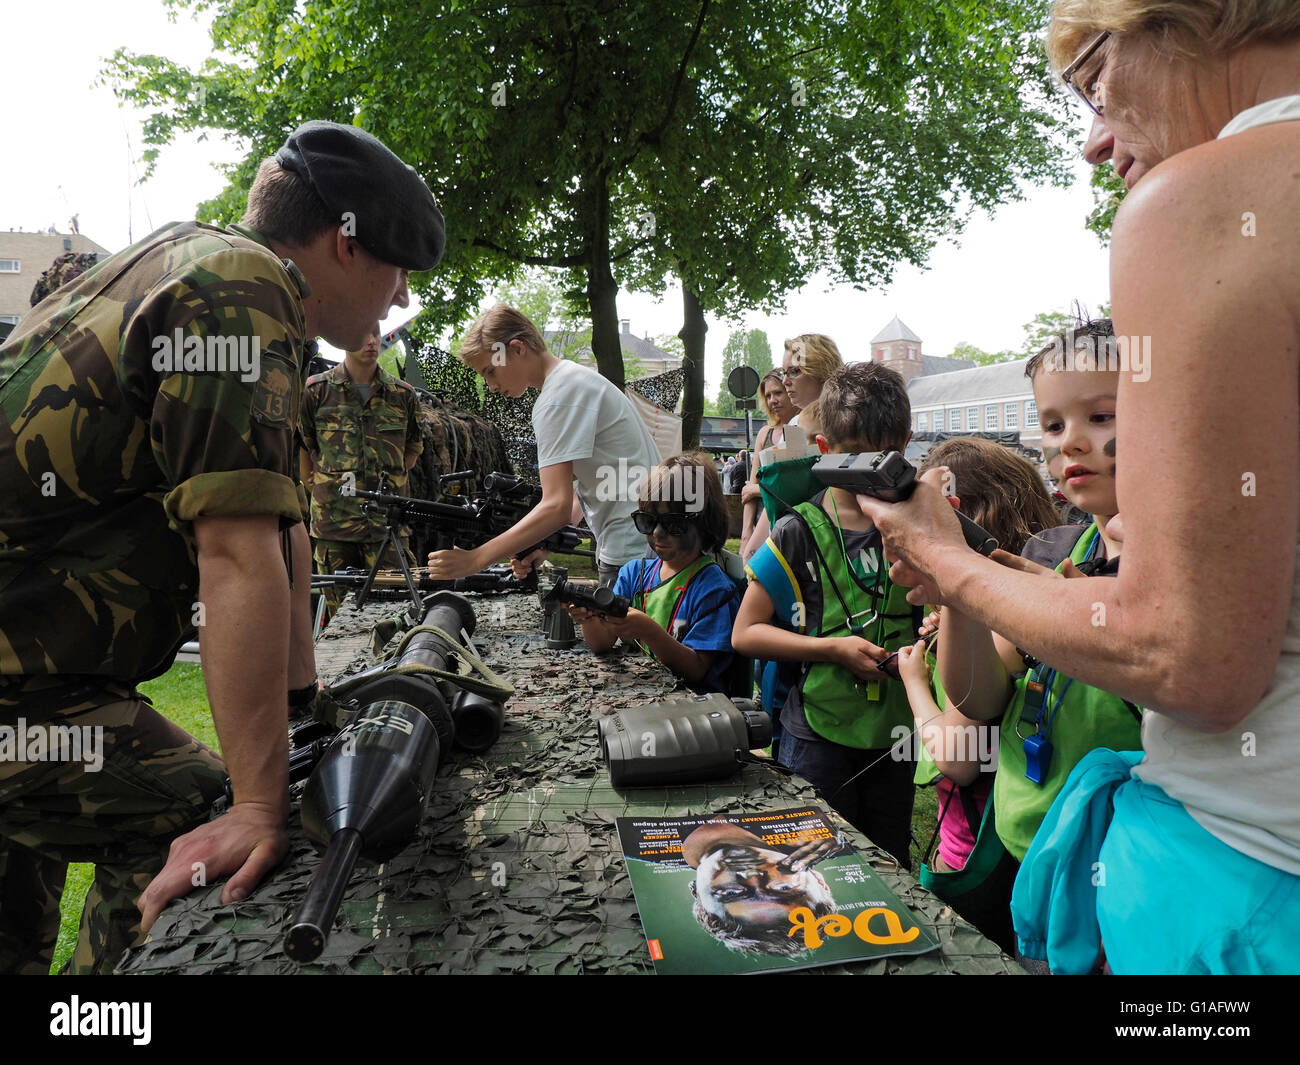 Dutch army soldier showing various arms and weaponry to civilians and children in the Valkenberg park, Breda, the Netherlands. Stock Photo